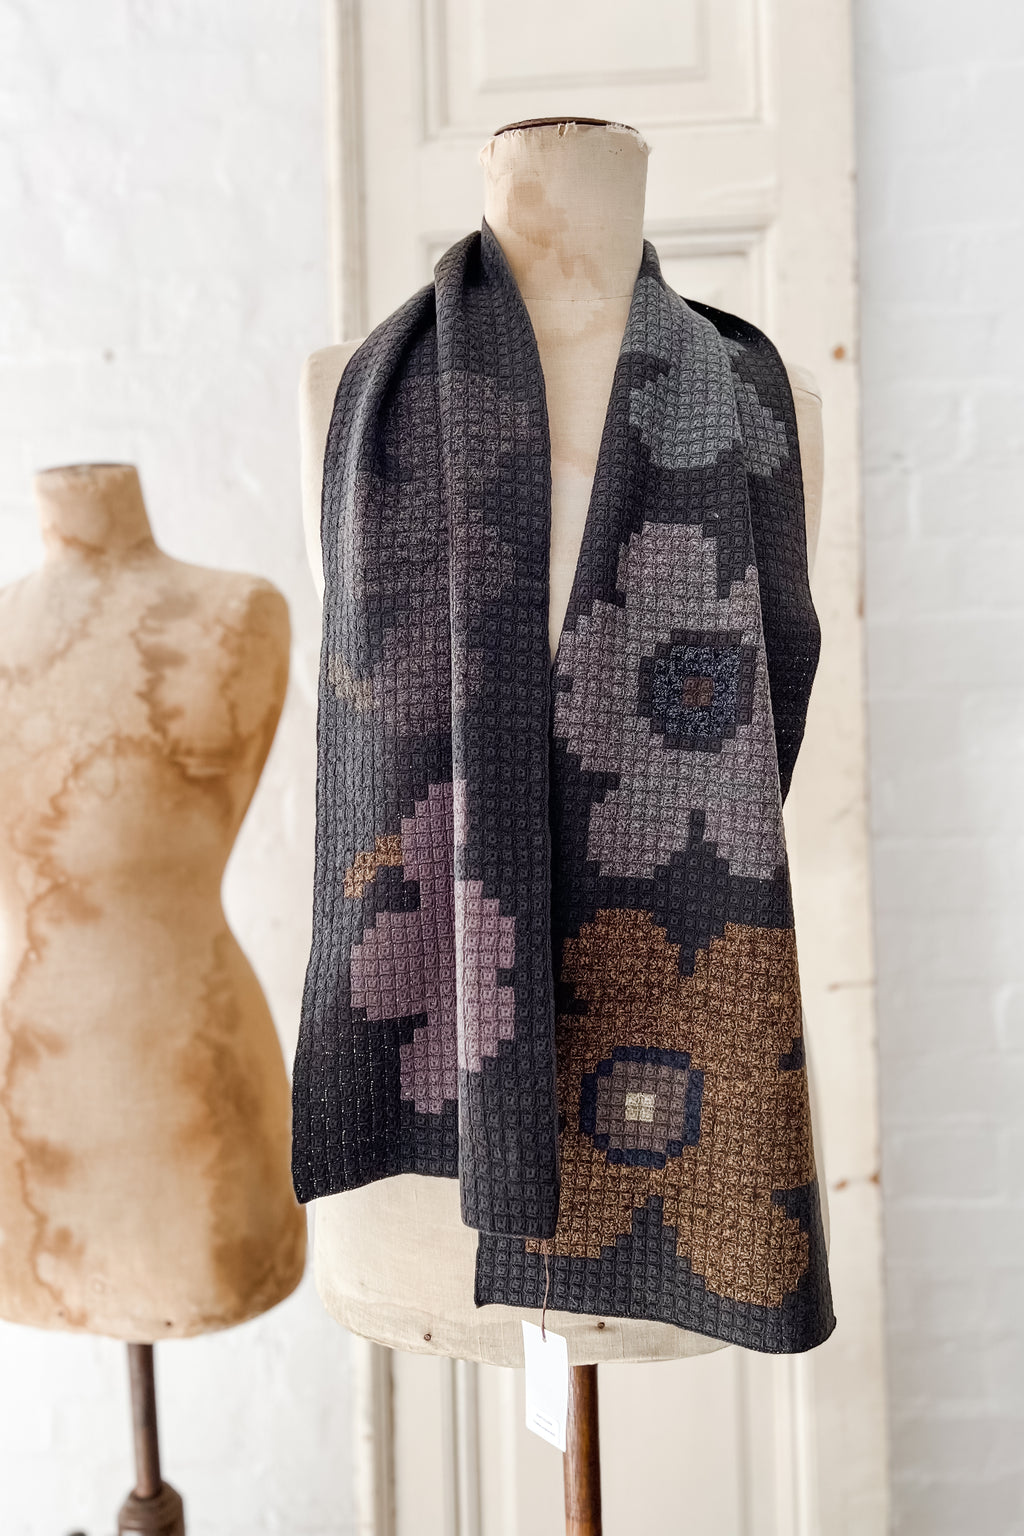 Sophie Digard | Floral Crochet Scarf | Chocolate